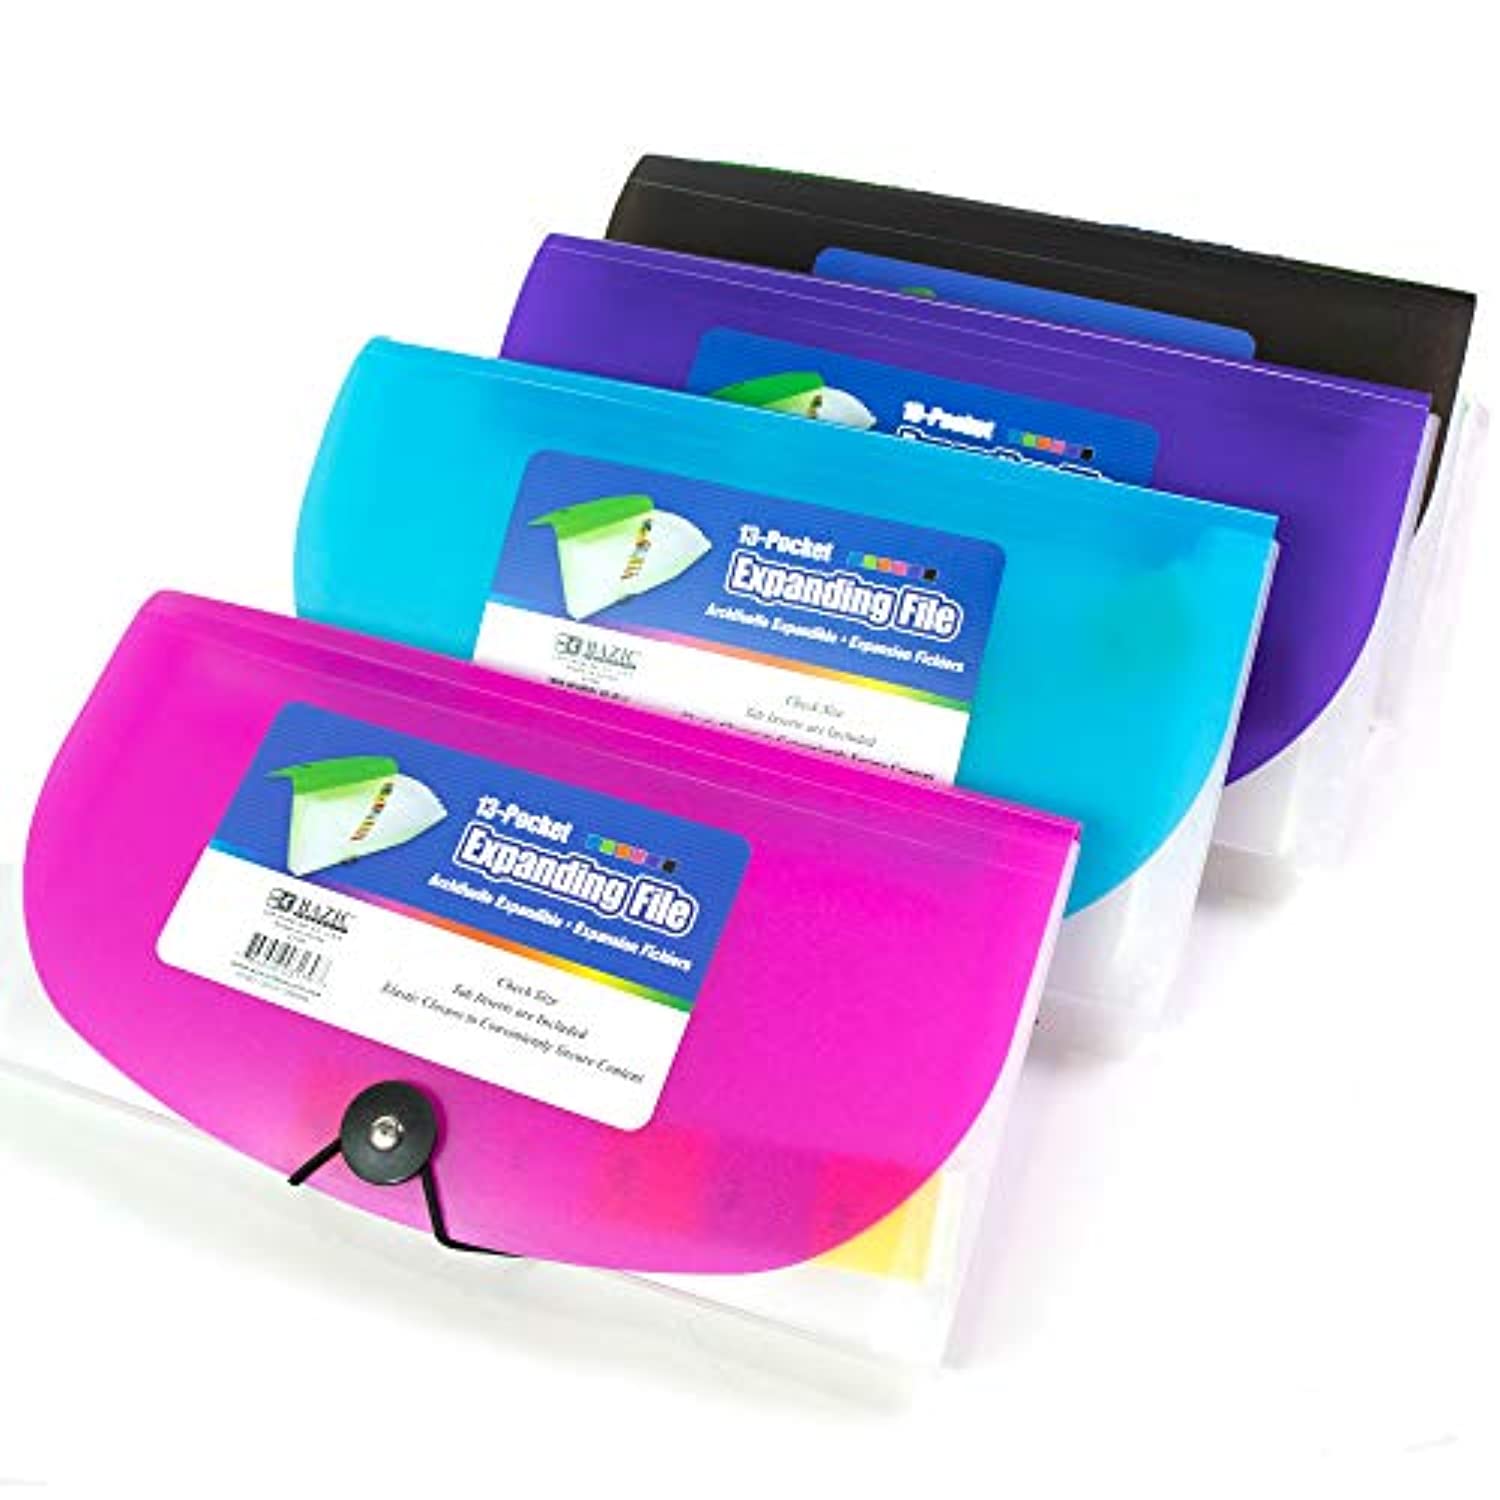 BAZIC 13 Pockets Dividers, Check Size Poly Expanding File, Holder Files Wallet Plastic Envelope Folders, Elastic Band Closure, Office Home Organize - Assorted Color, 4-Pack.